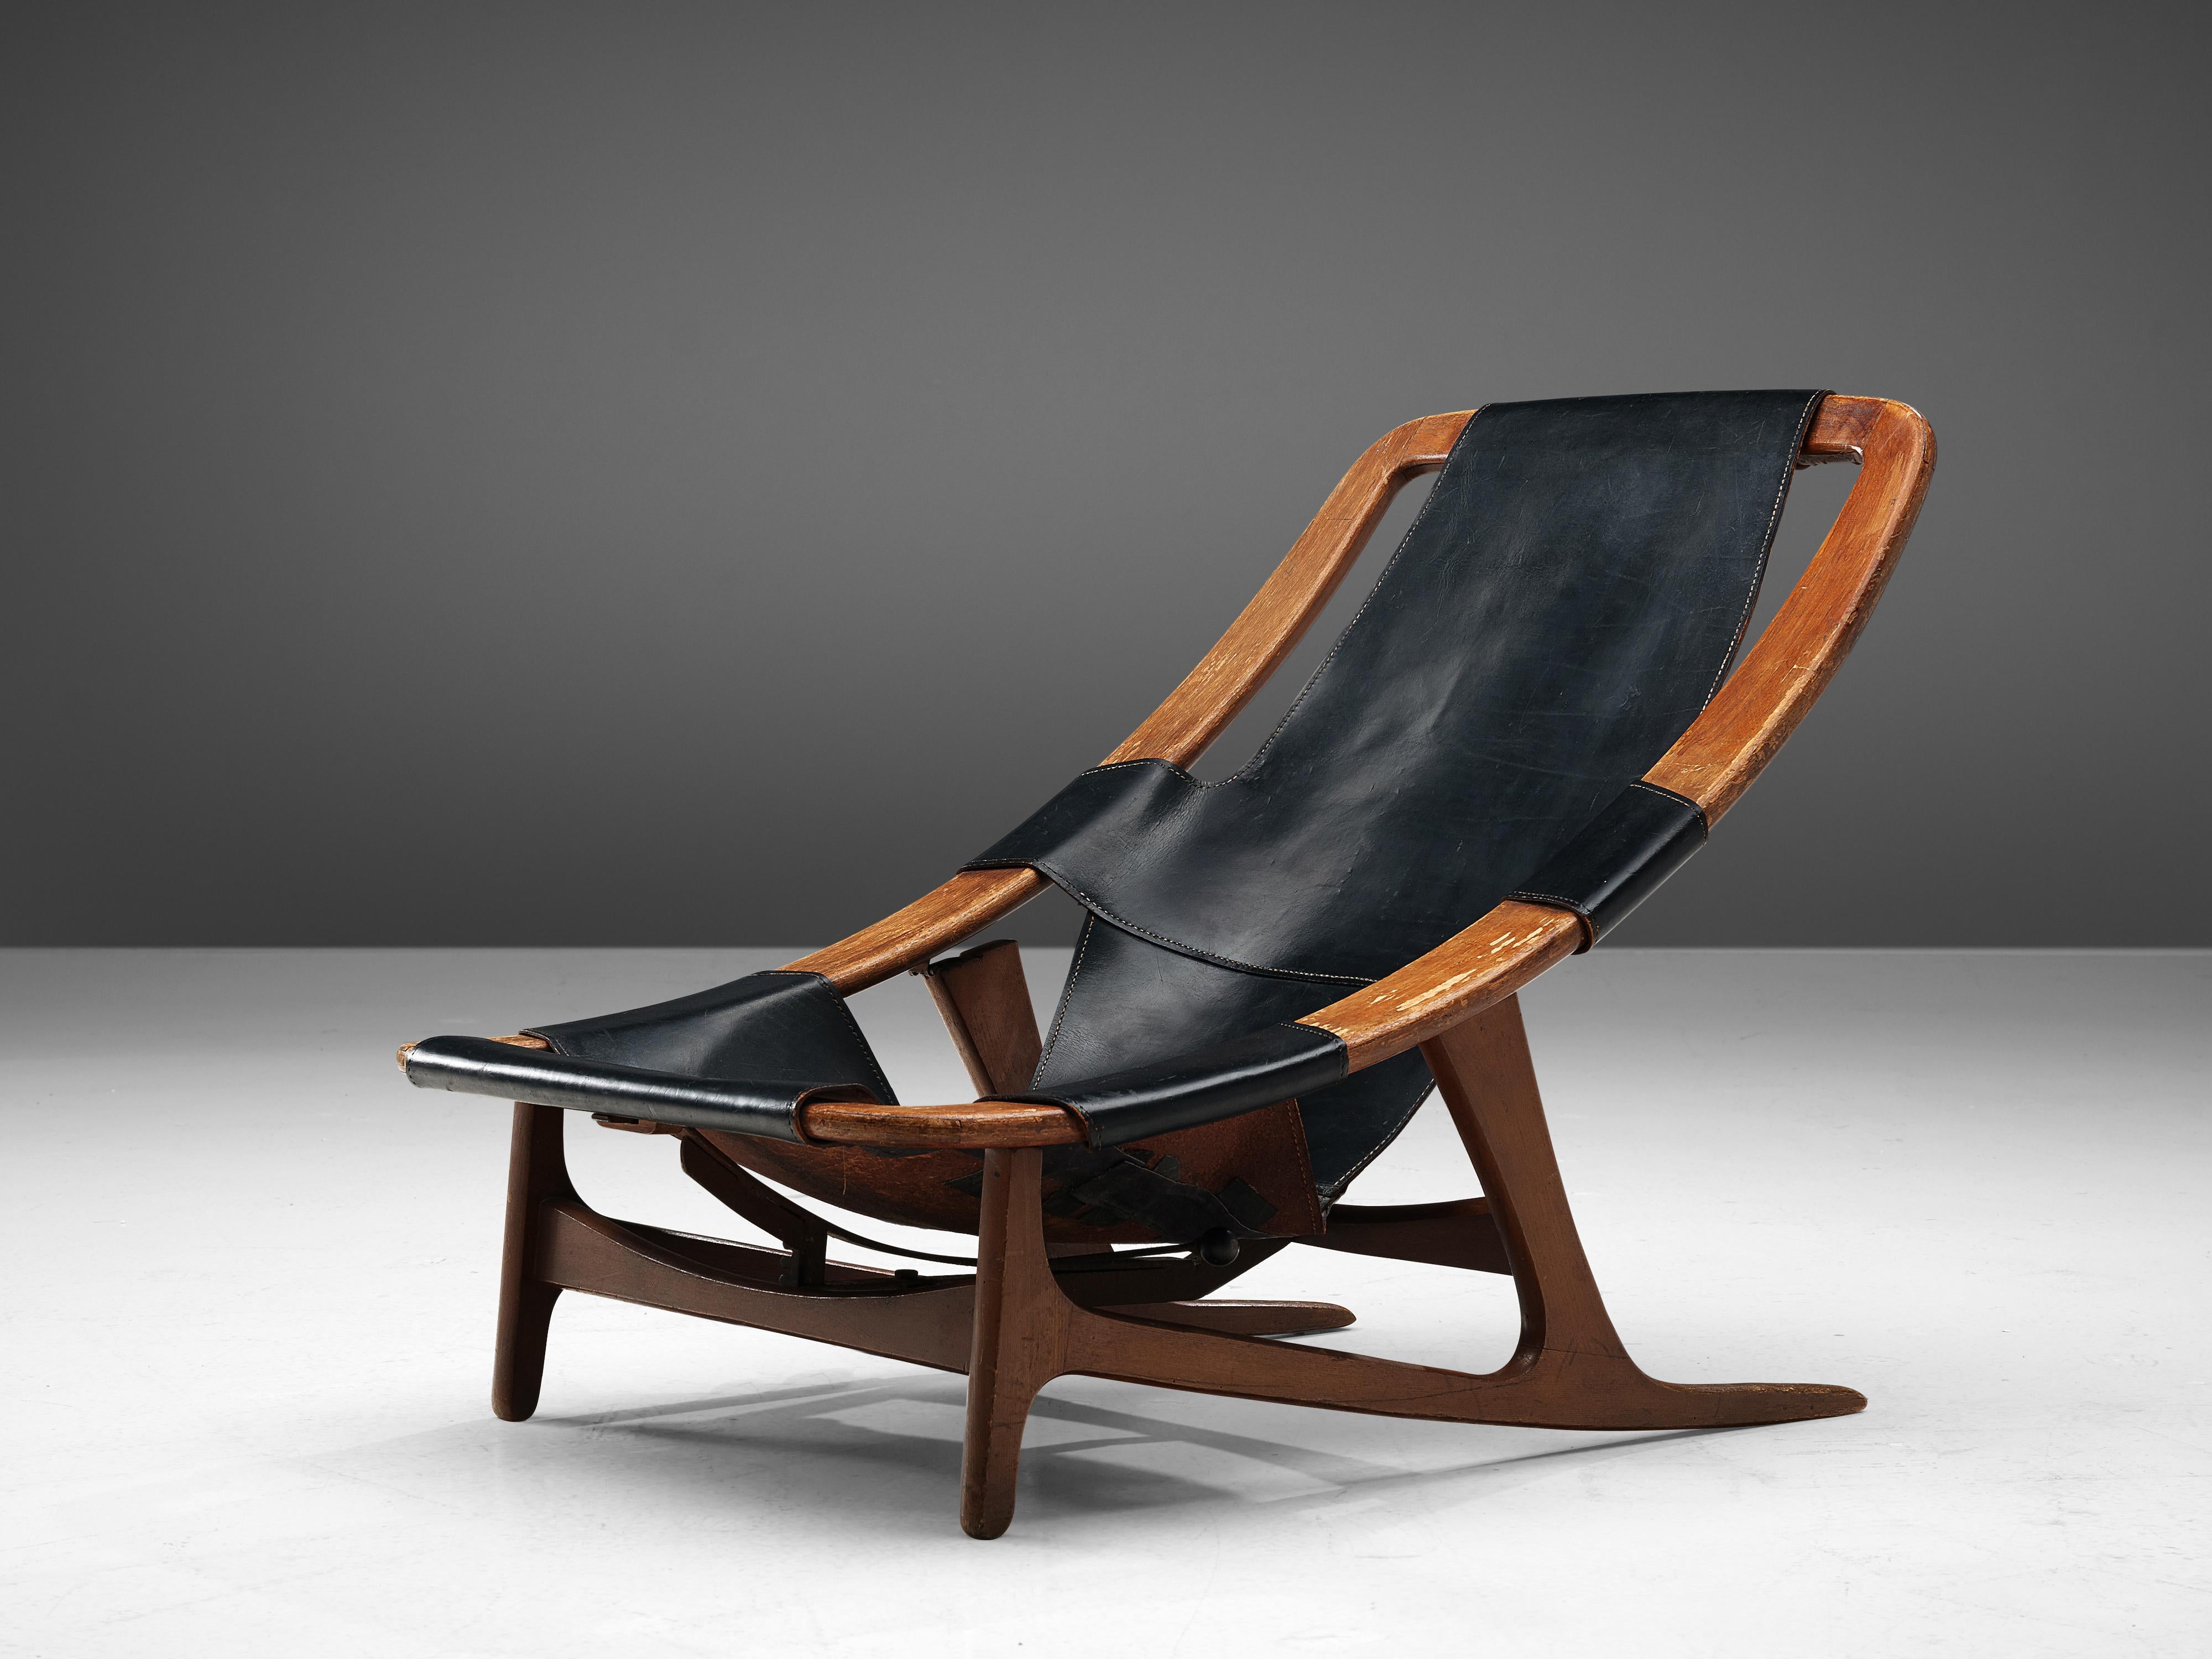 Arne F. Tidemand Ruud for ISA, lounge chair 'Holmenkollen,' teak, black leather, Italy, 1959.

This easy chair is designed by Norwegian designer Arne F. Tidemand Ruud and produced by Italian manufacturer ISA. This chair is very dynamic due its